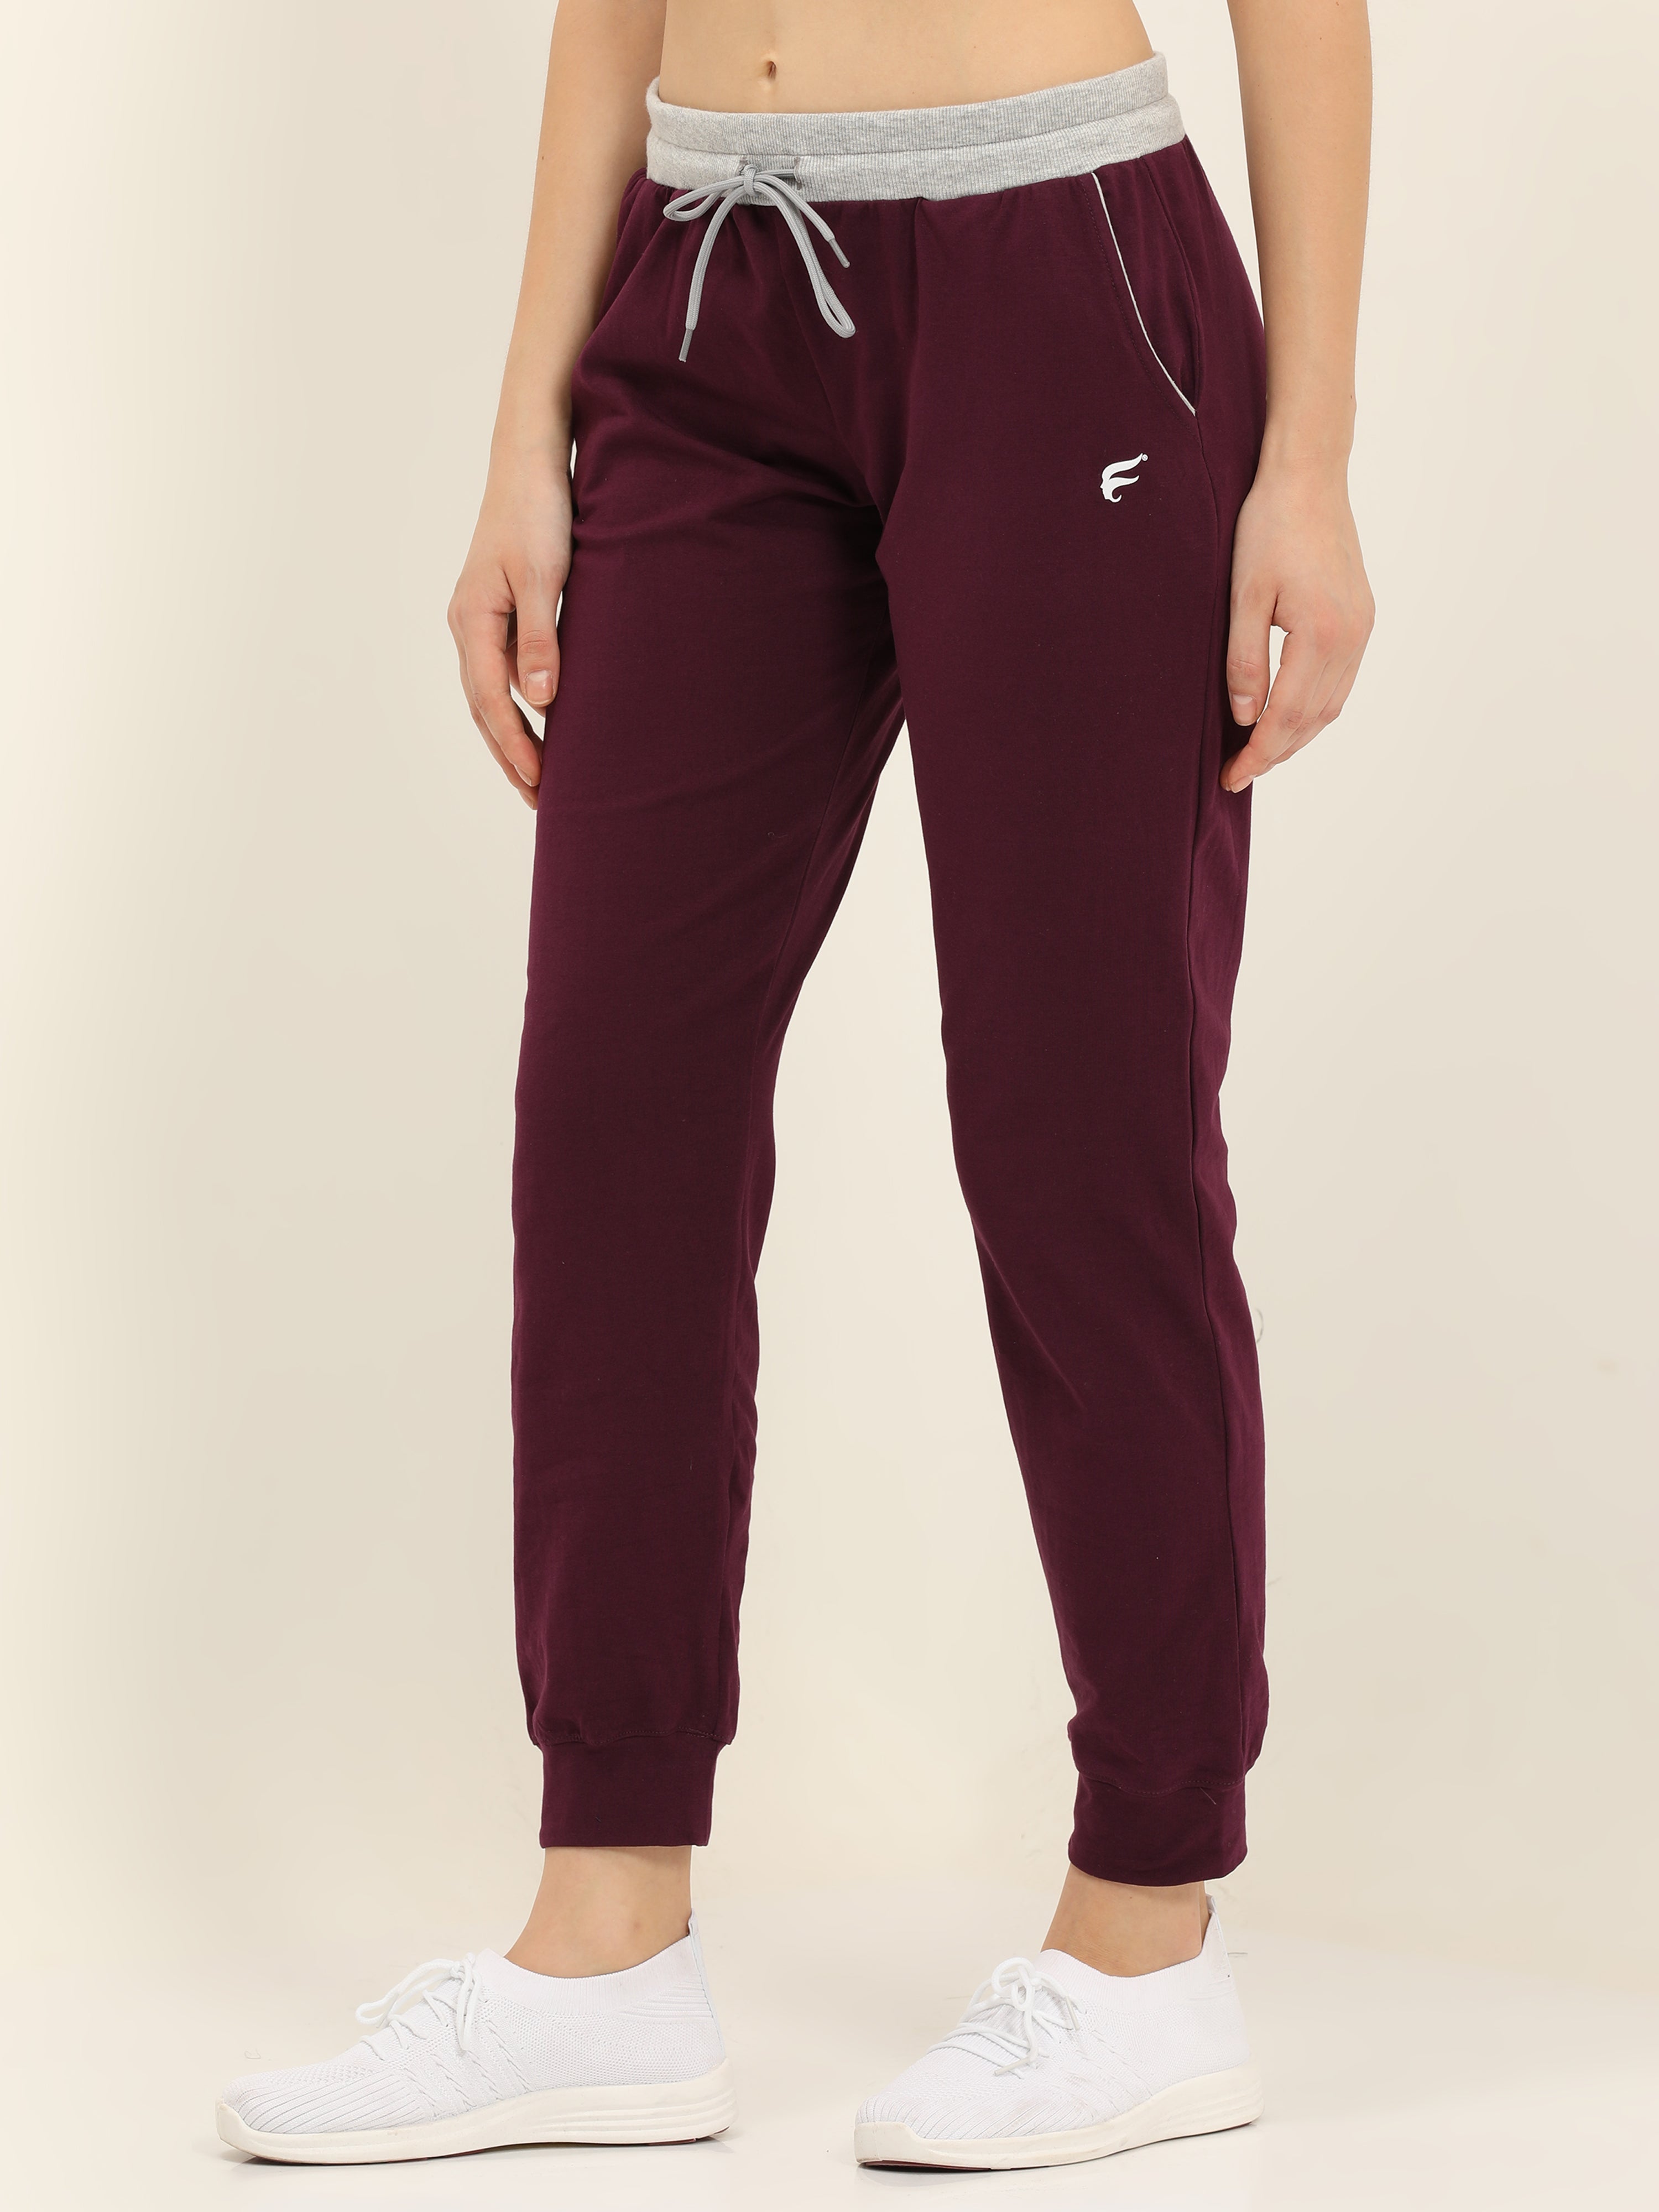 How to Dress Up Sweatpants - PureWow